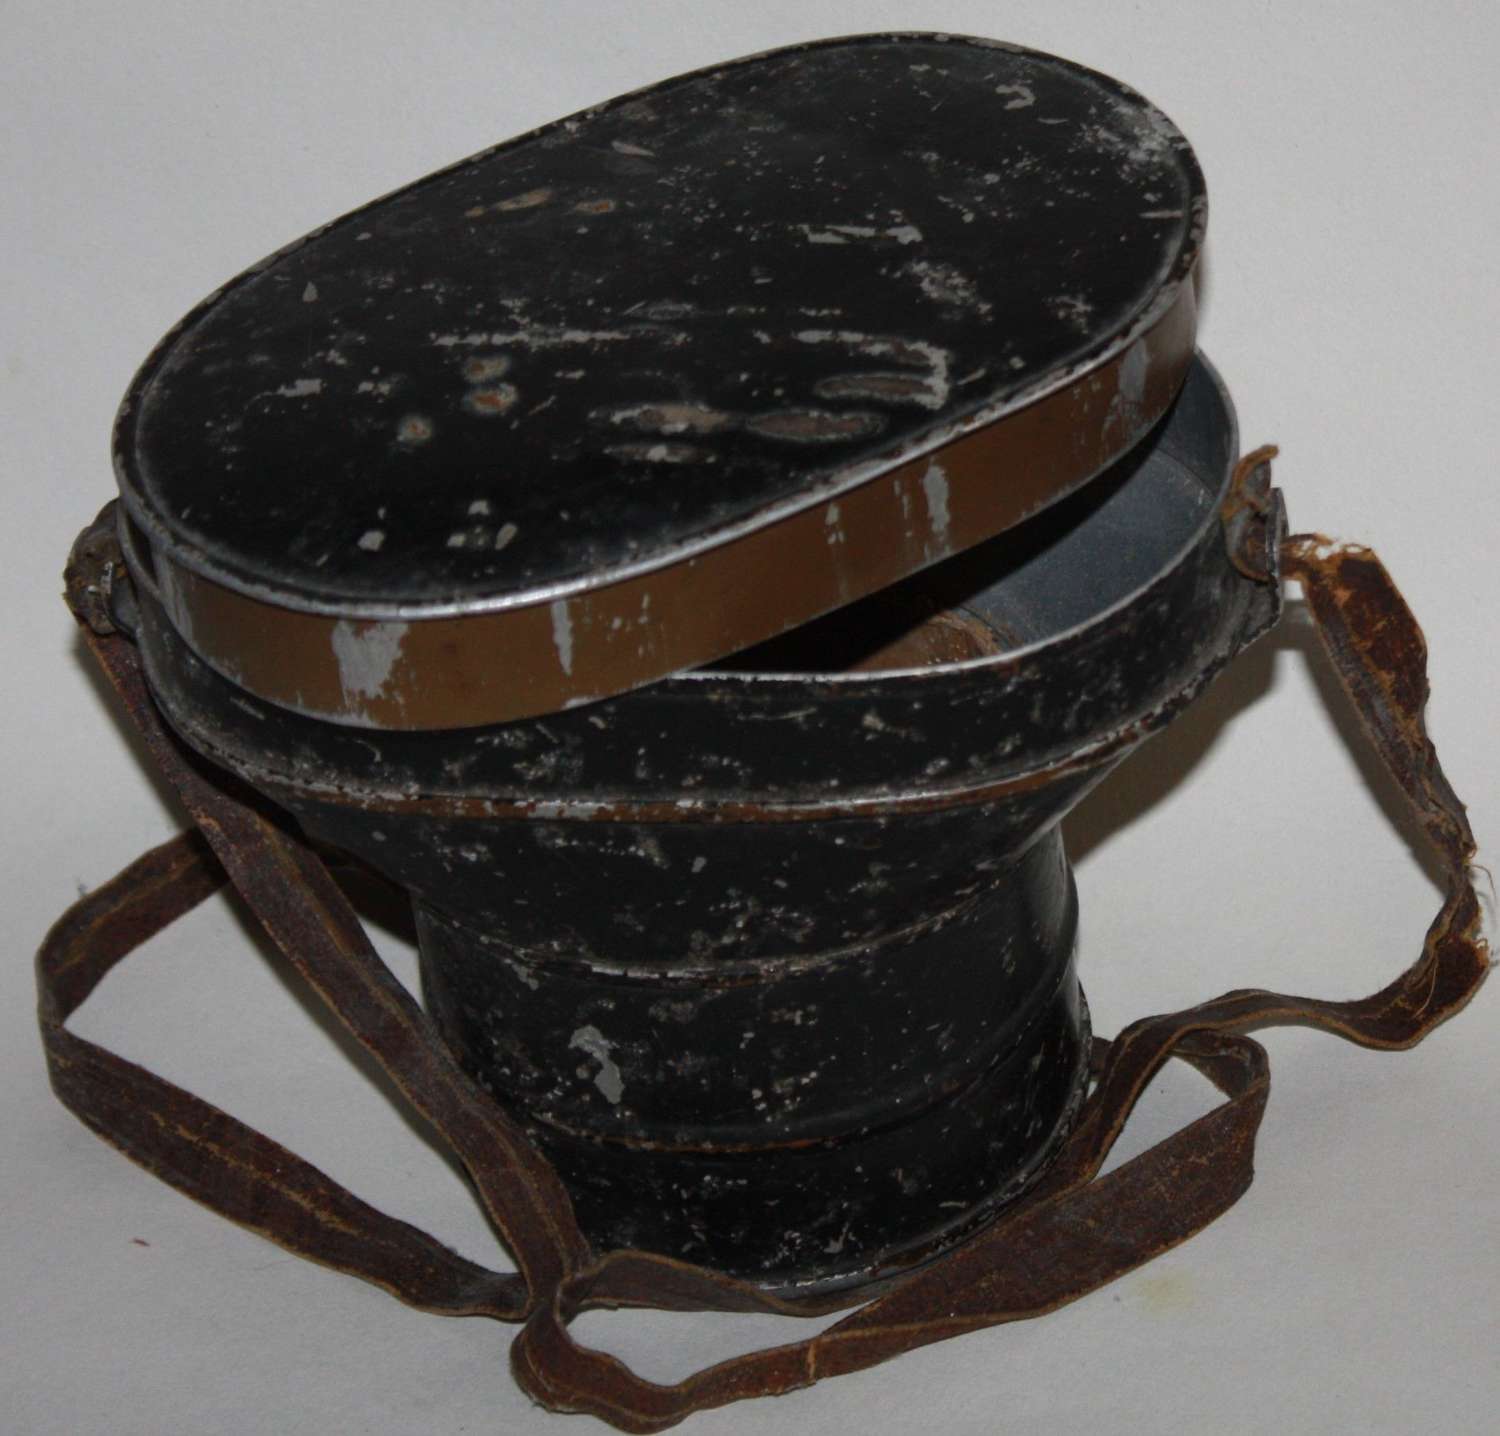 A WWII CIVILIAN GAS MASK CONTAINER